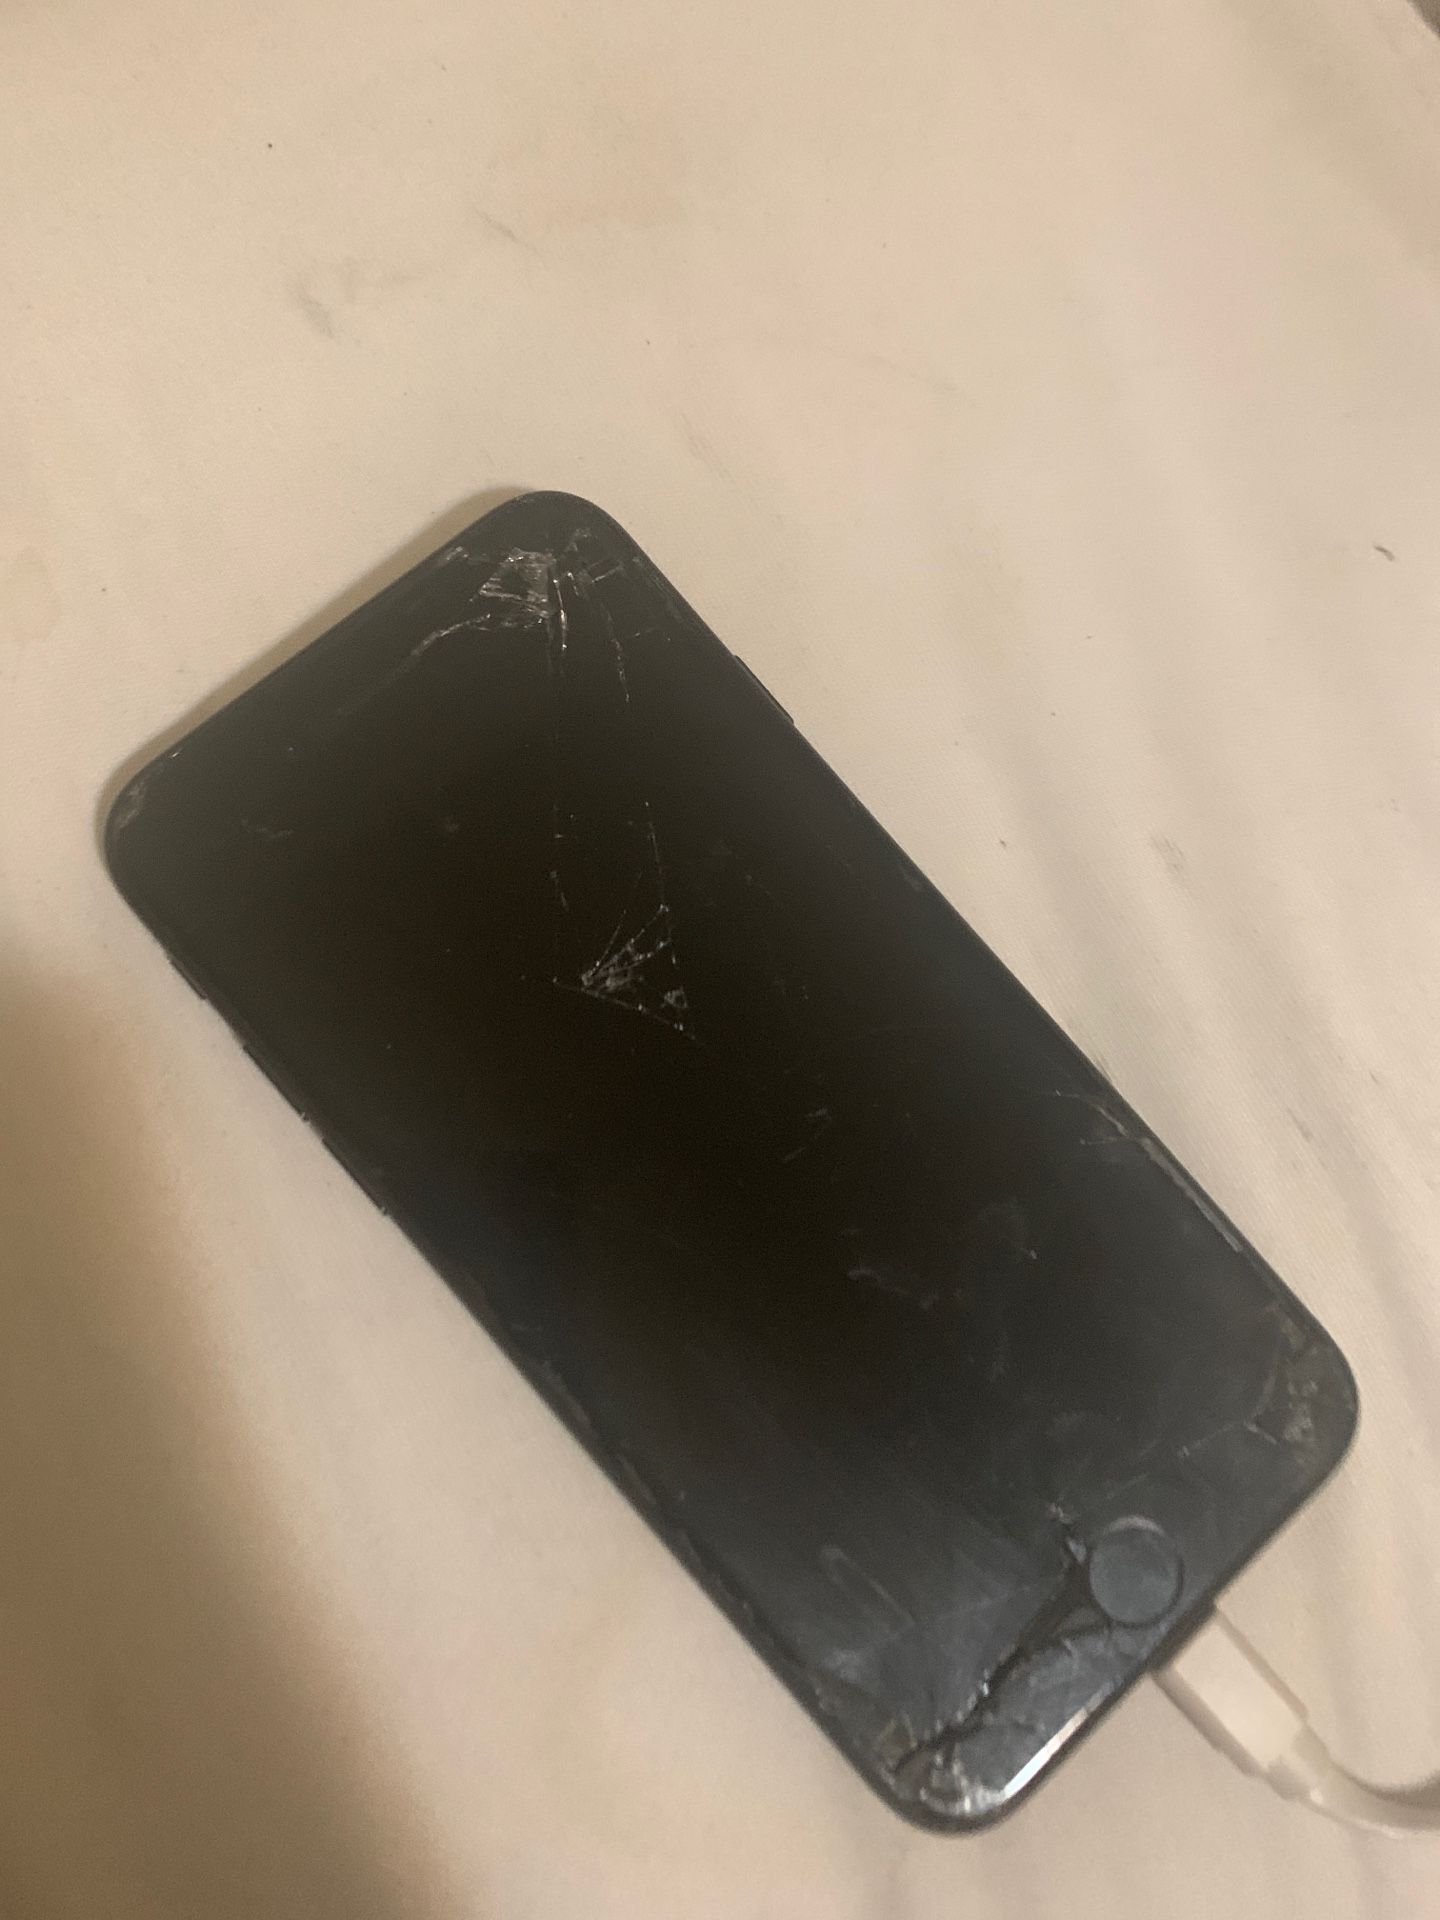 Broken iPhone 7 doesn’t work at all